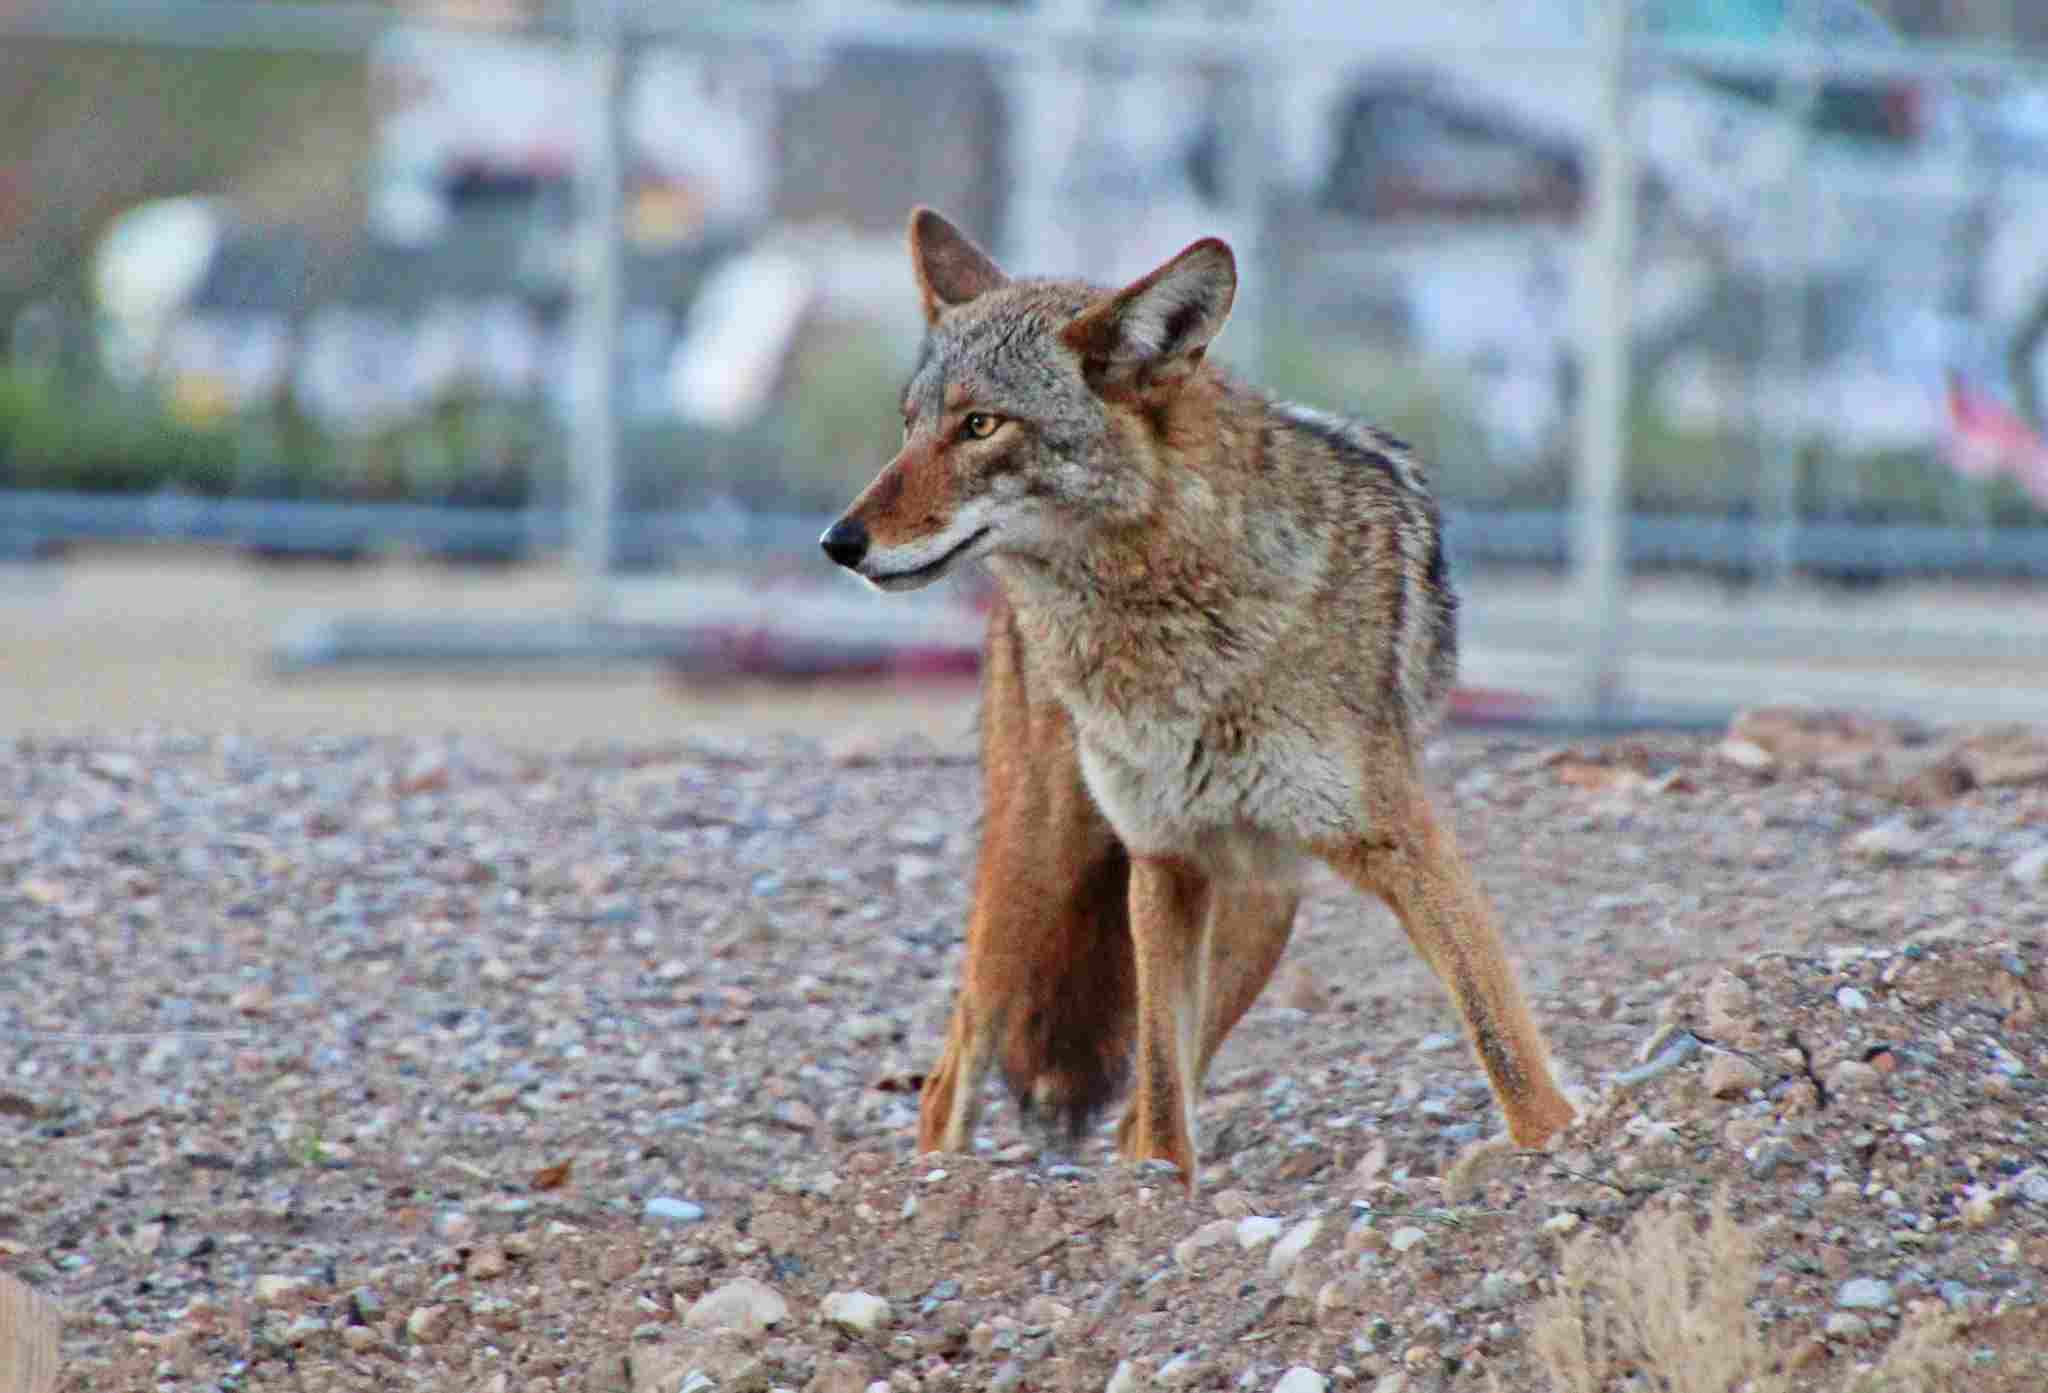 Hyena Vs Coyote: Adaptability is Behind the Survival of Coyotes in Urbanized and Degraded Areas (Credit: Renee Grayson 2019 .CC BY 2.0.)